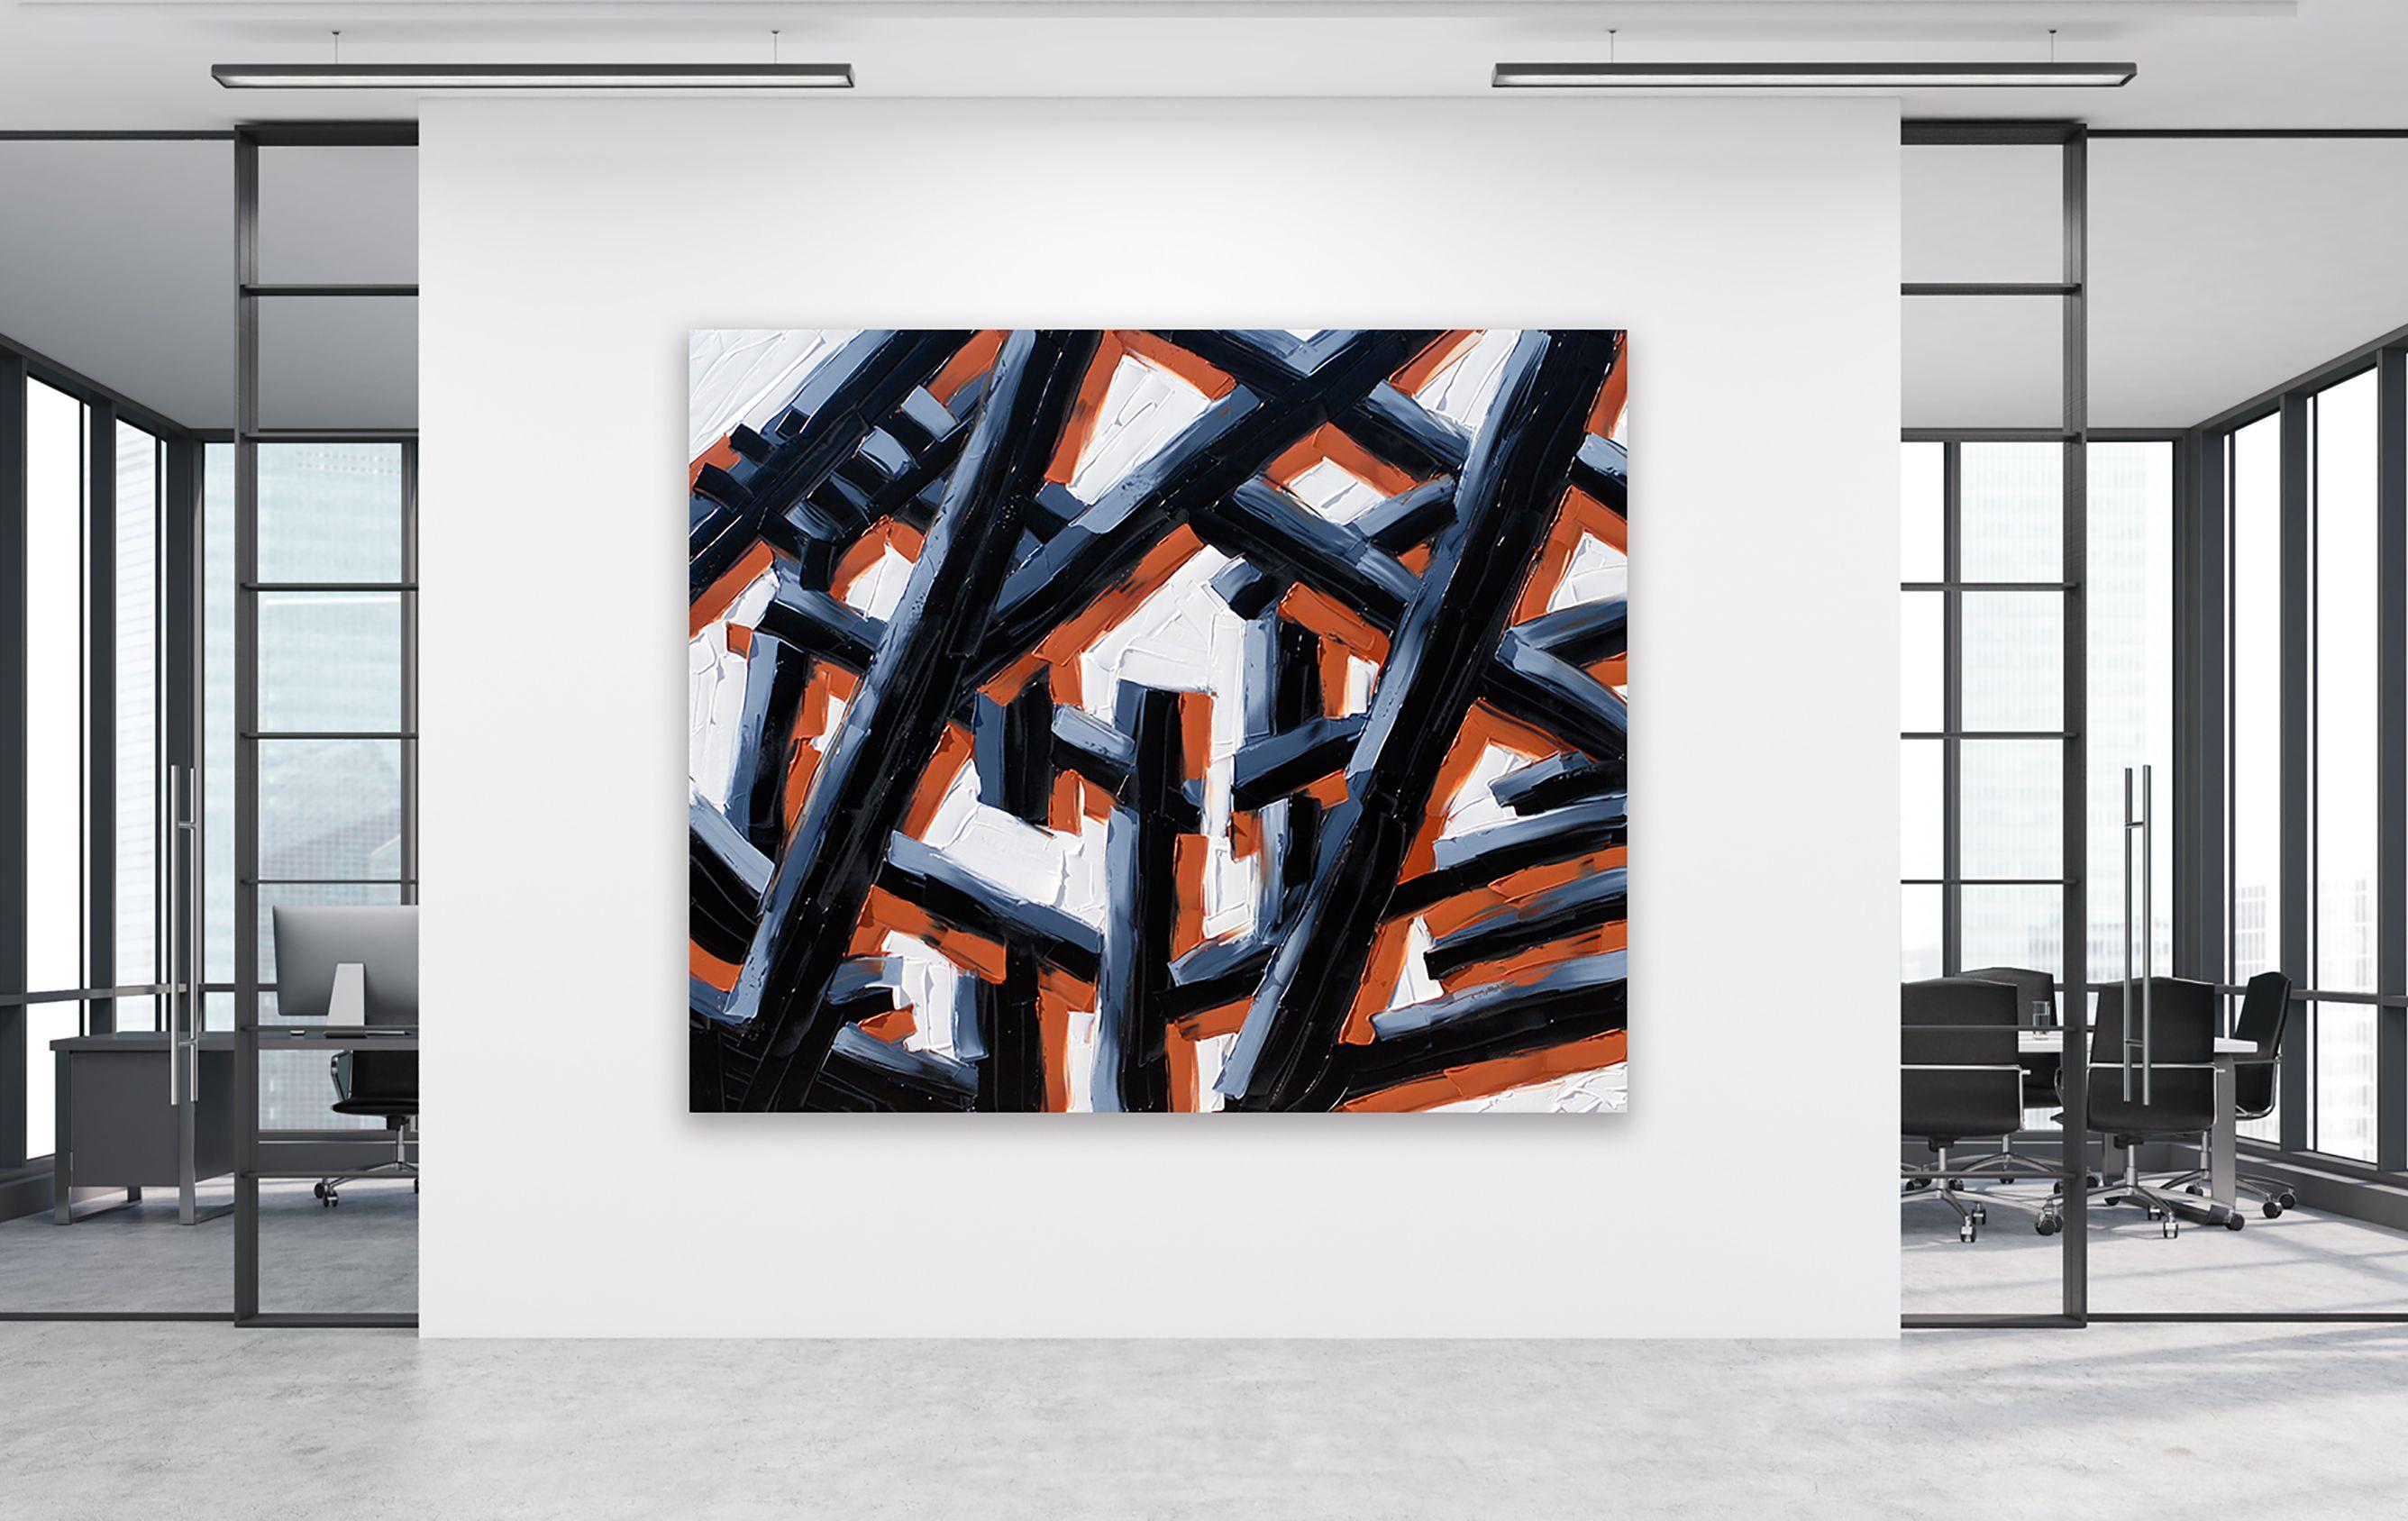 One mild obsession with the construction of a high-rise. Phase 4. :: Painting :: Abstract :: This piece comes with an official certificate of authenticity signed by the artist :: Ready to Hang: Yes :: Signed: Yes :: Signature Location: an S in the